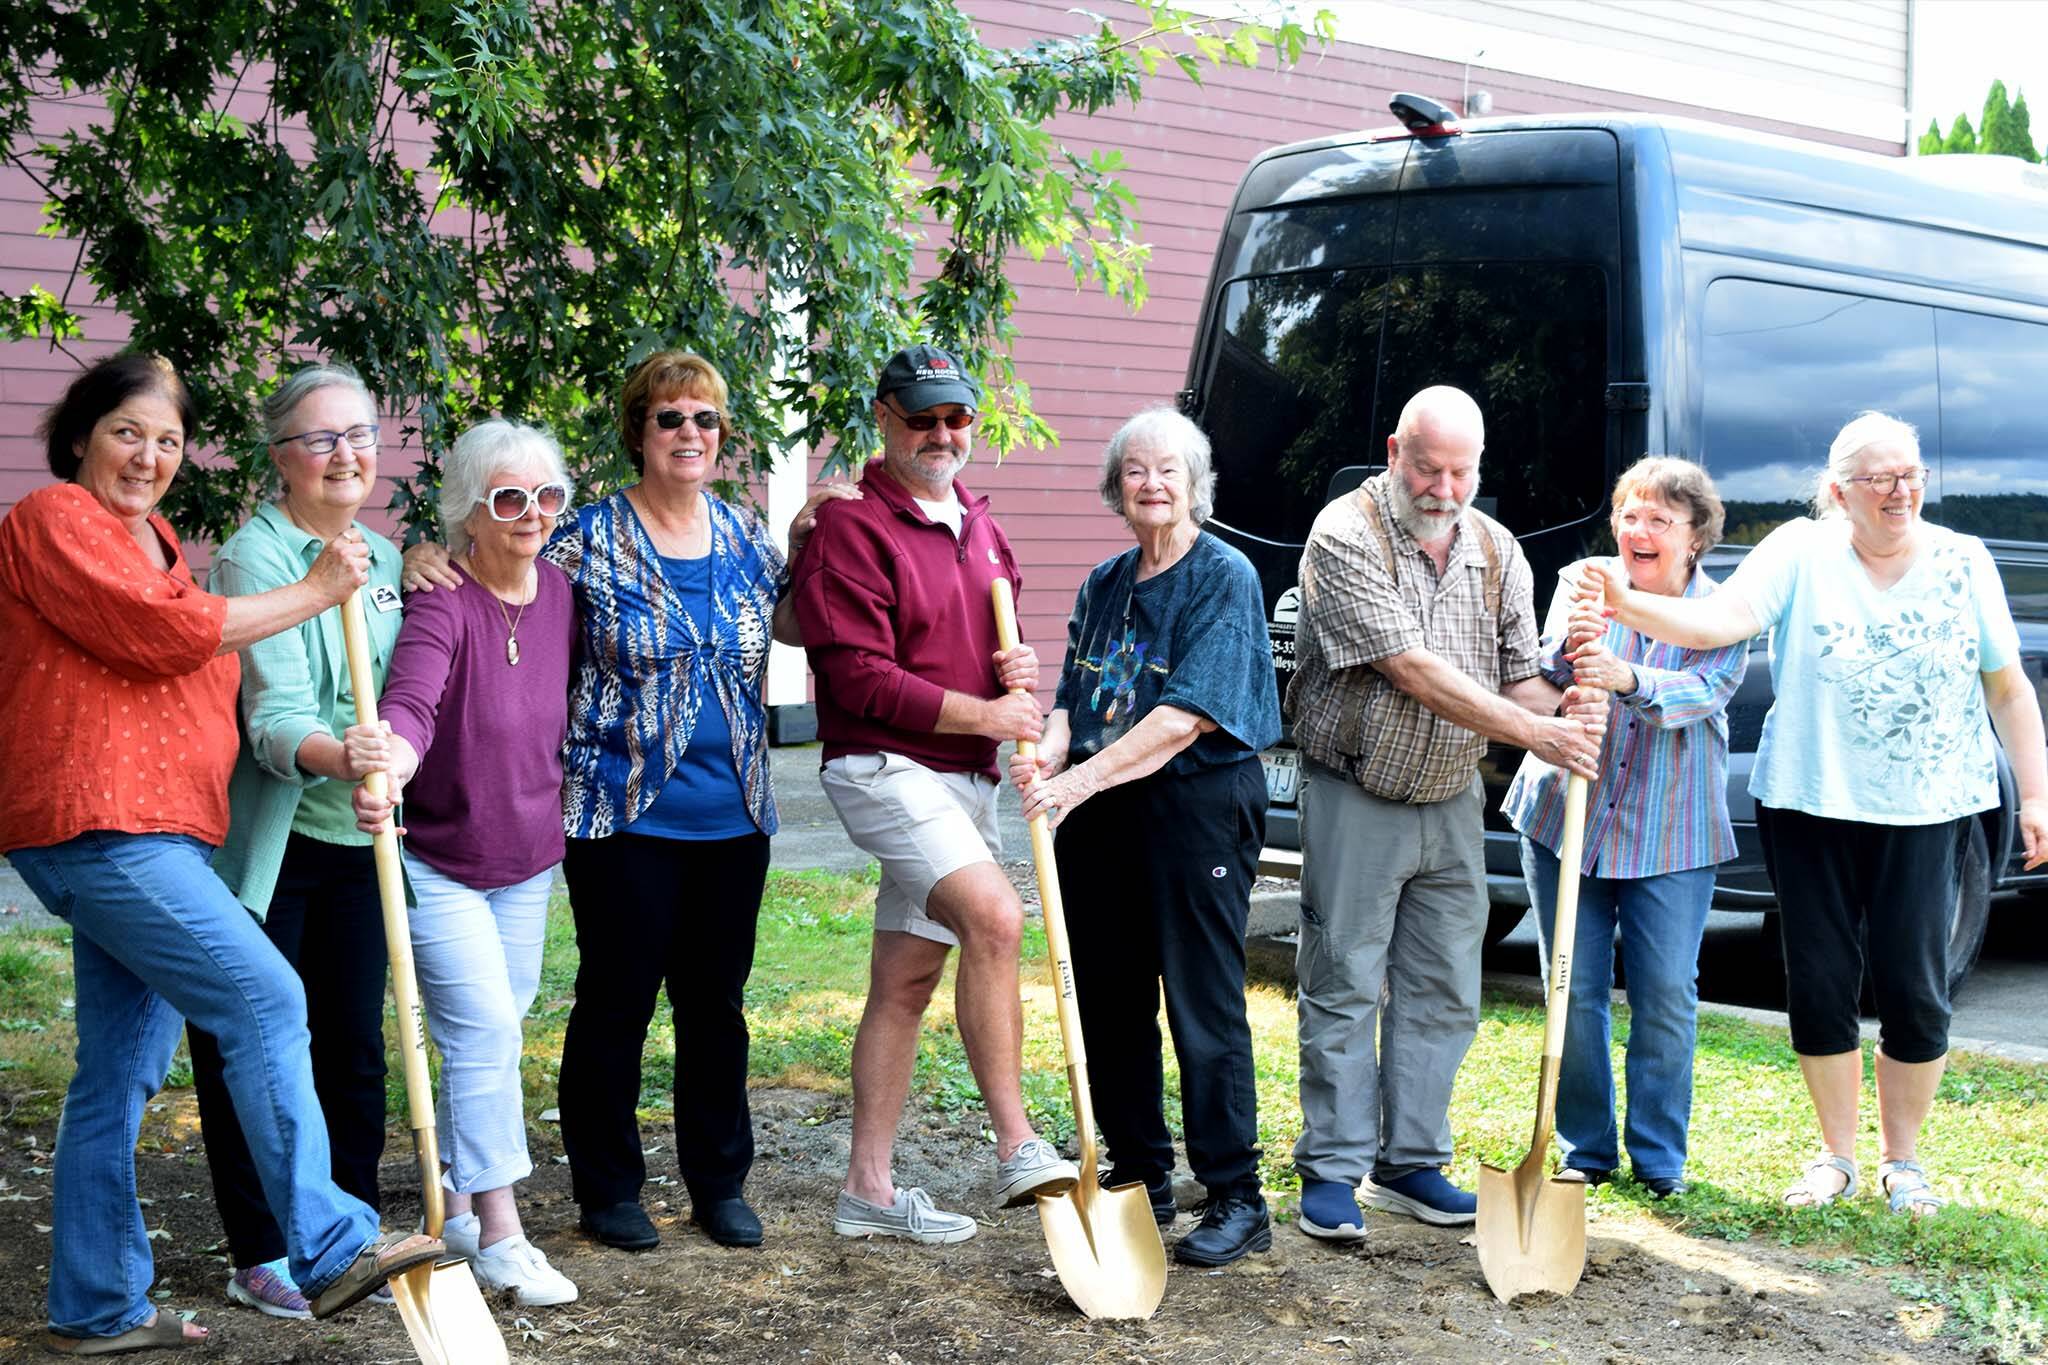 Current and former members of the Sno-Valley Senior Center Board of Directors at the groundbreaking. Photo Conor Wilson/Valley Record.